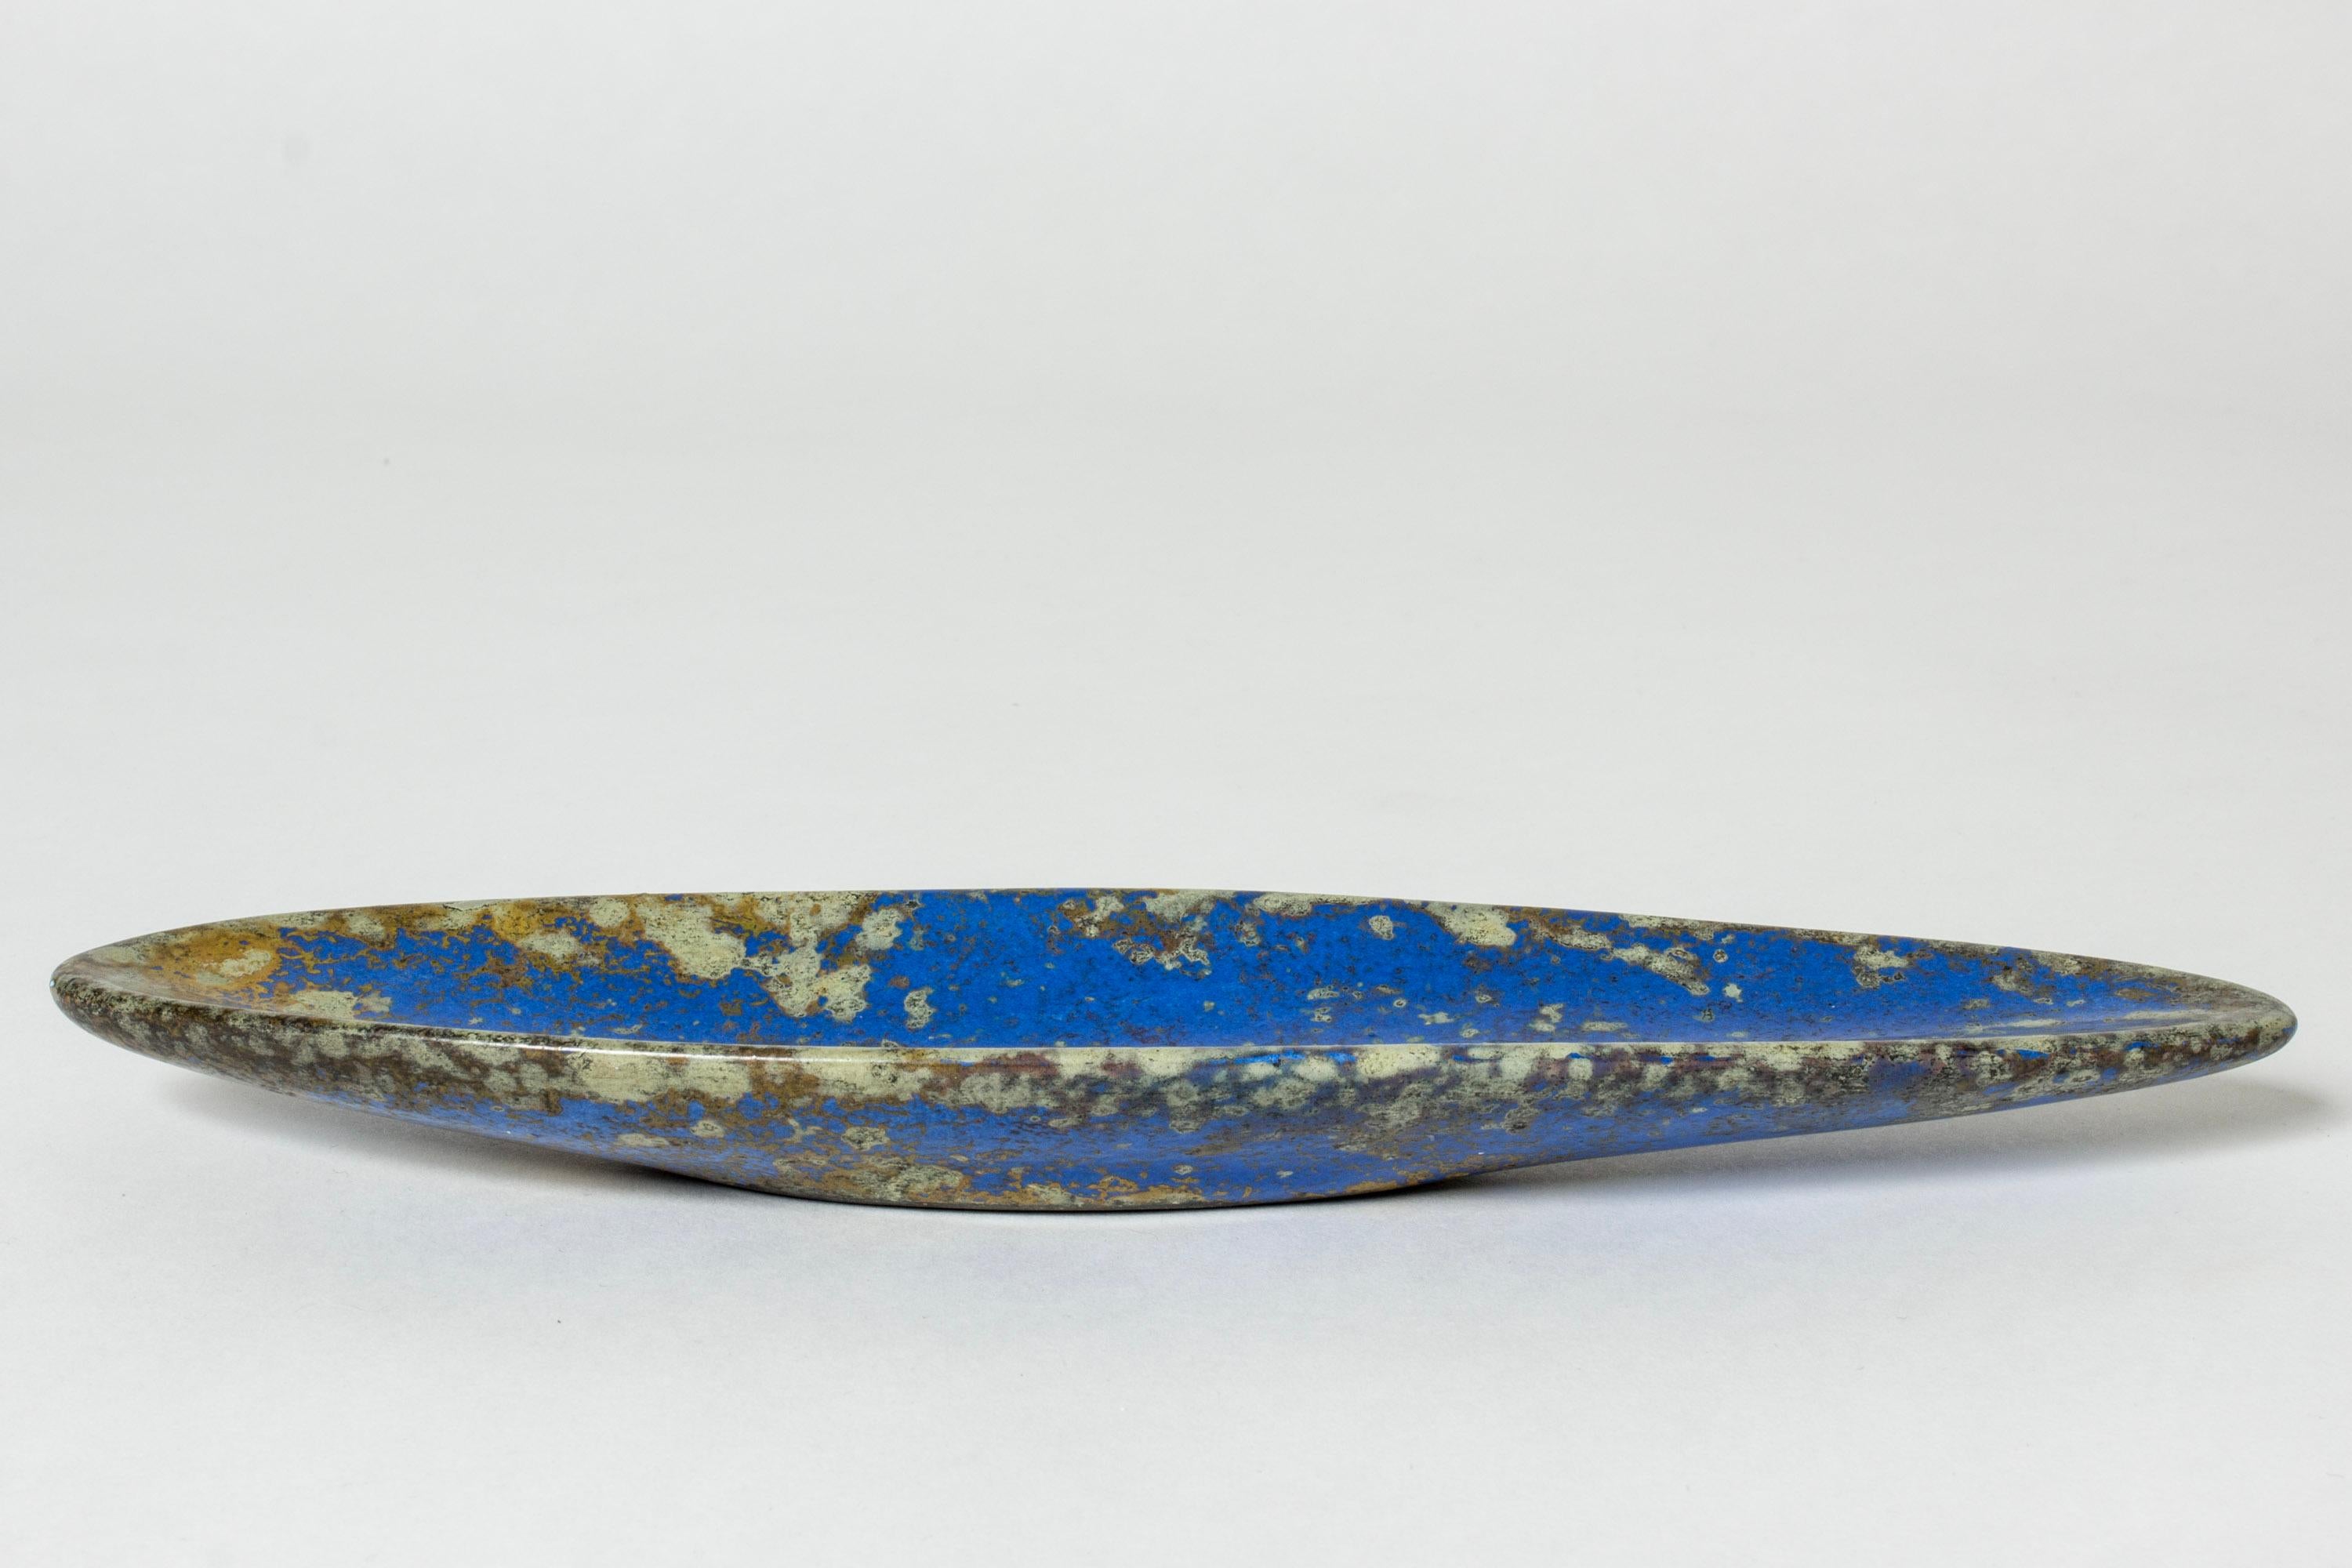 Beautiful small platter by Hans Hedberg, made in faience. Almond shaped with striking blue glaze covered with litchen-like flecks.